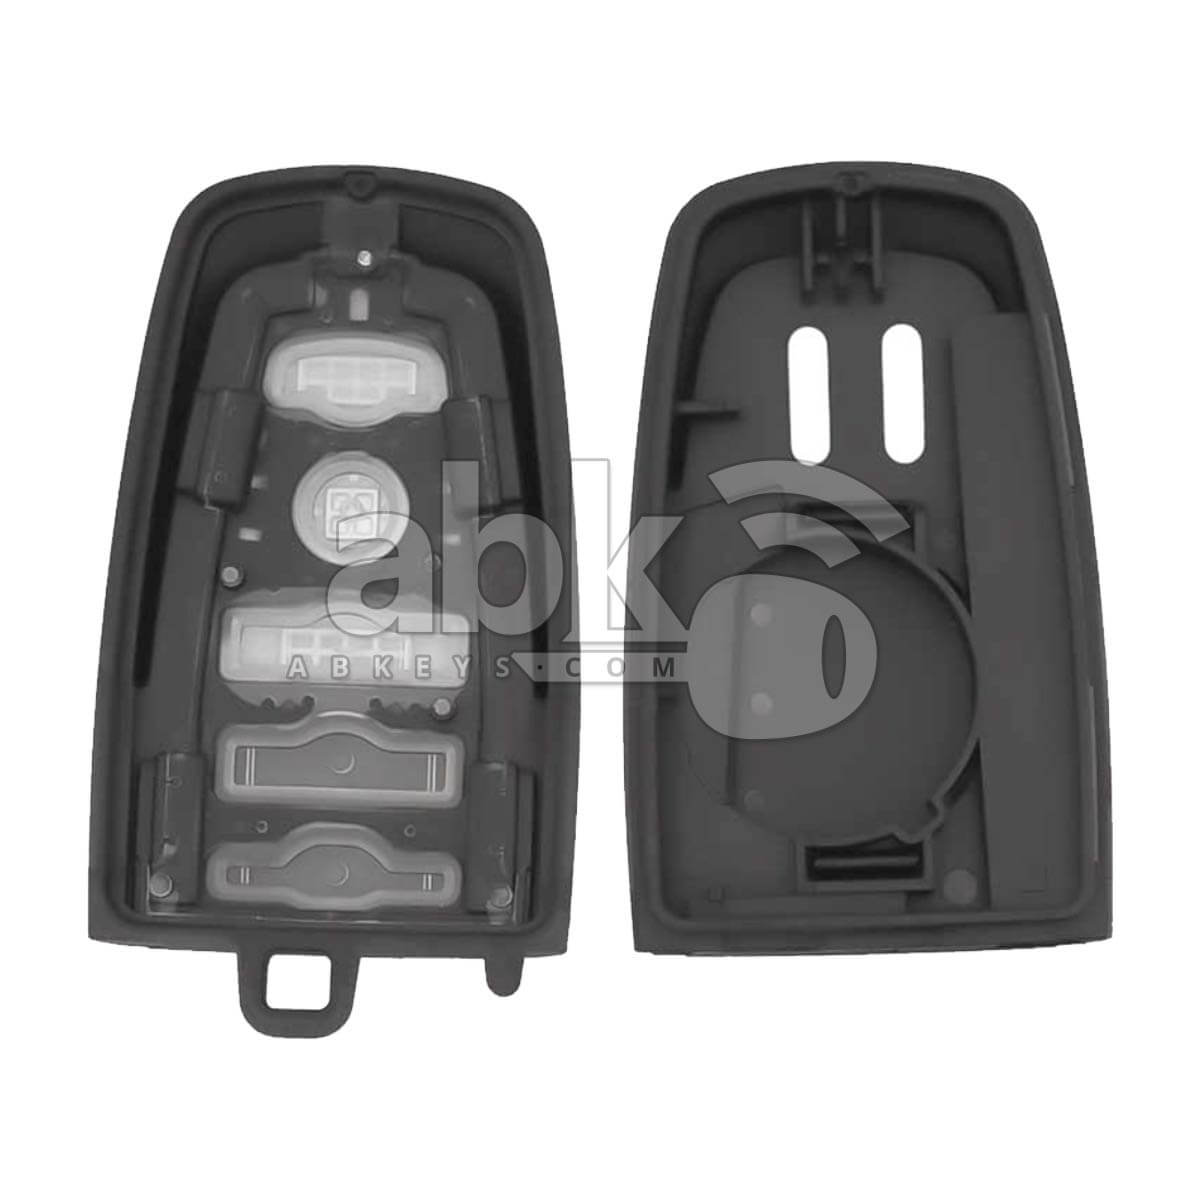 Ford 2017+ Smart Key Cover 2Buttons - ABK-1721 - ABKEYS.COM